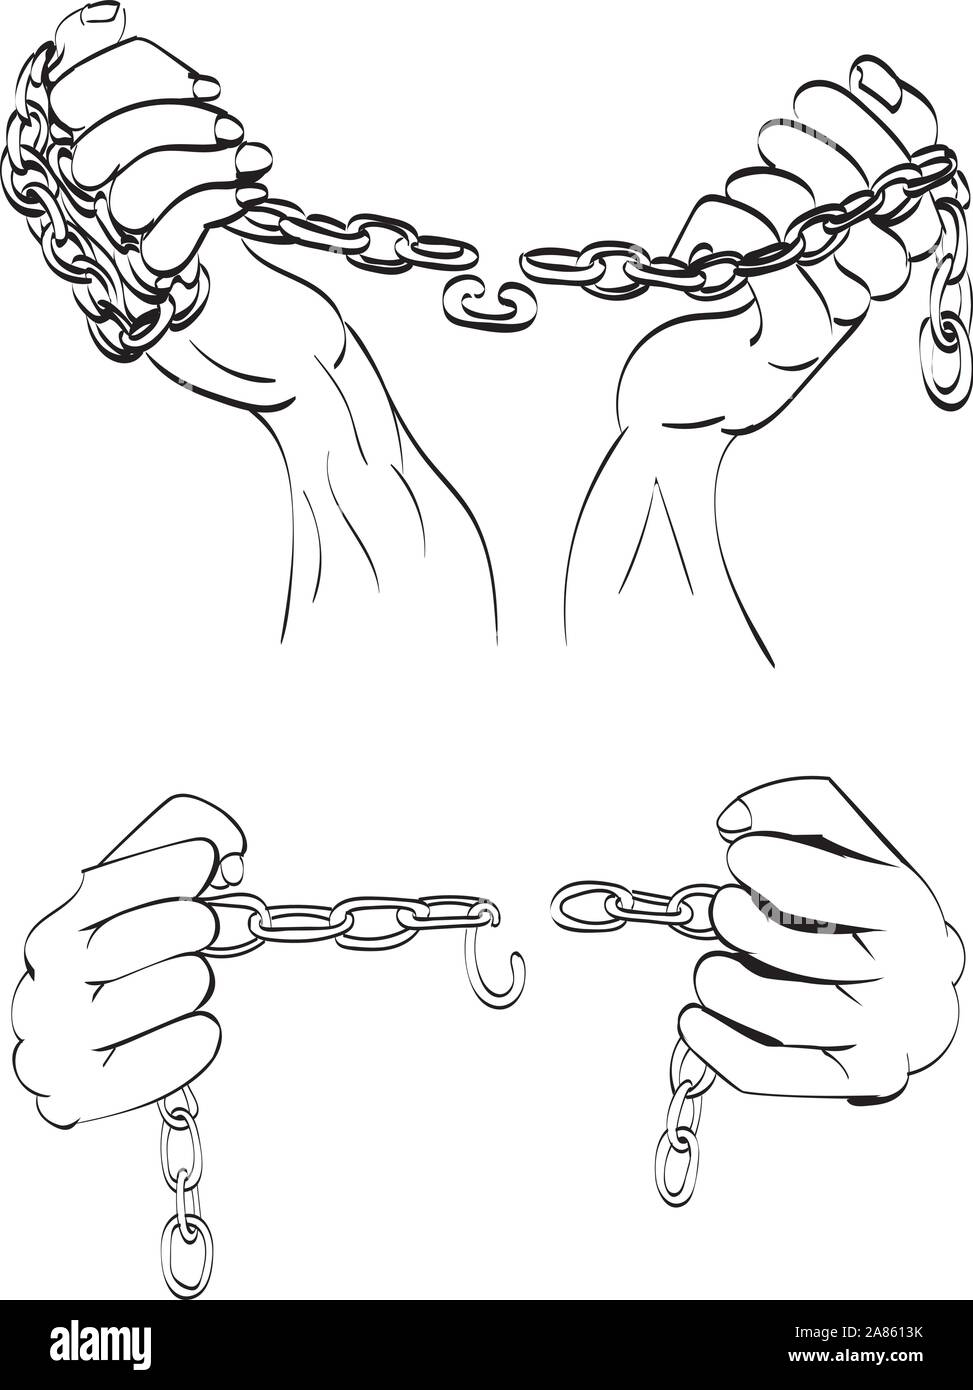 Gray metal chains with shackles on hands silhouette on white background. Stock Vector